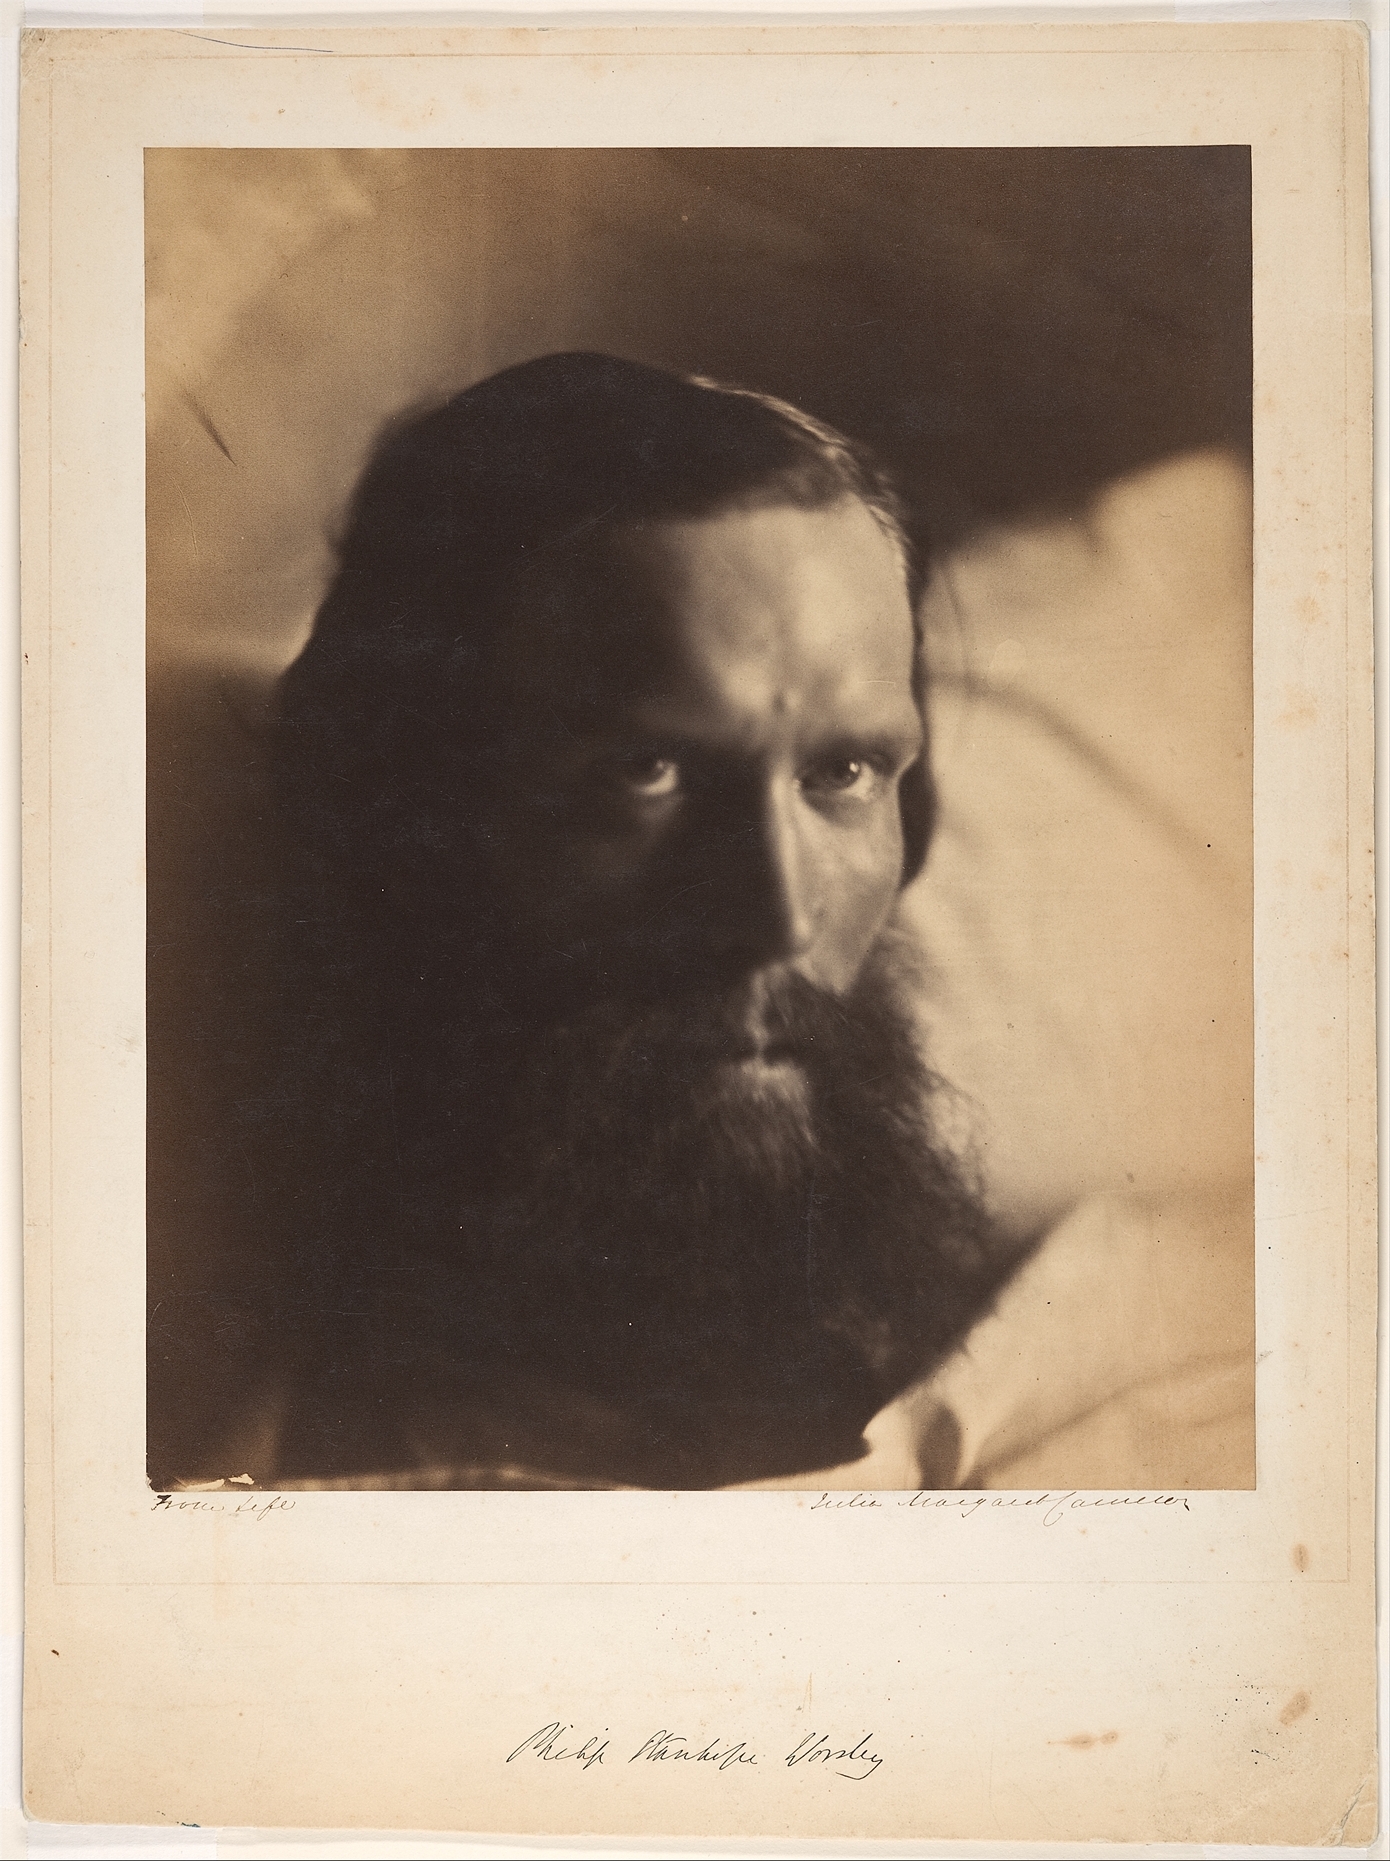 A photograph by Julia Margaret Cameron of the poet Philip Worsley